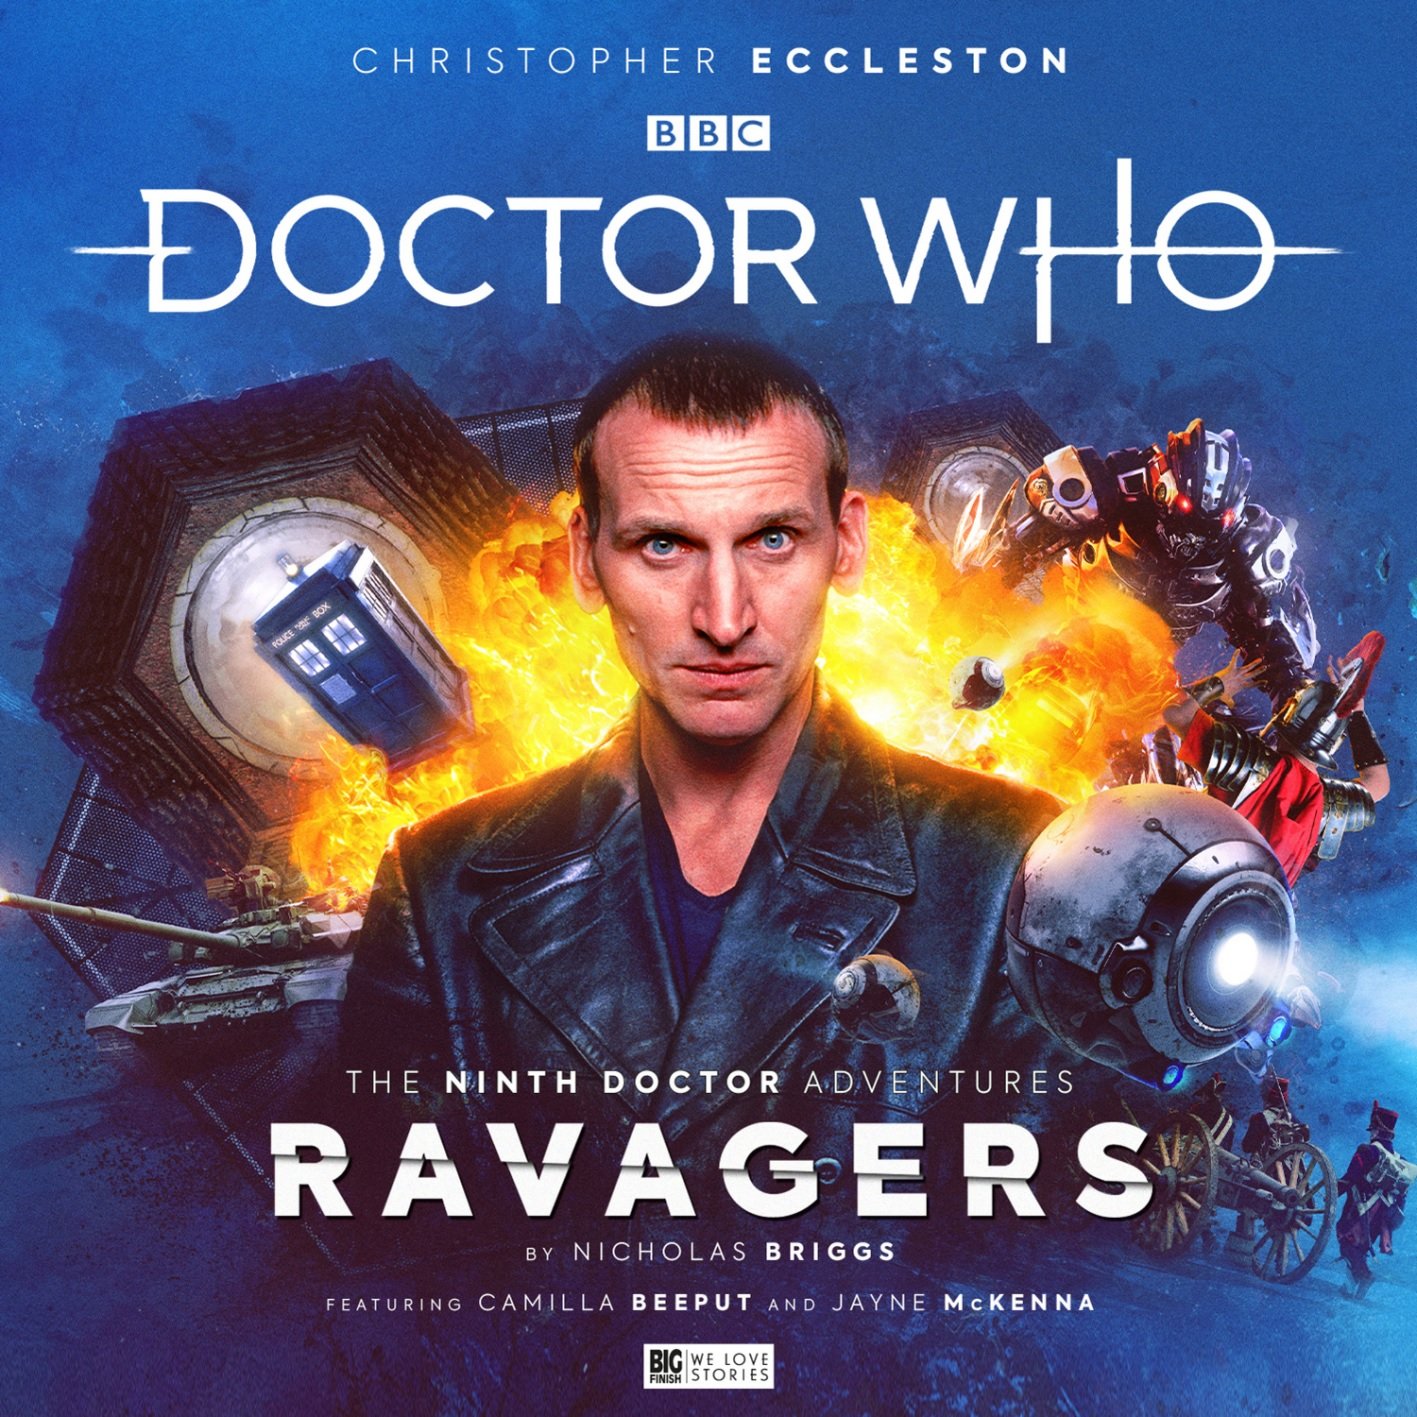 Cover and Details Revealed for Big Finish’s Ninth Doctor Adventures: Ravagers